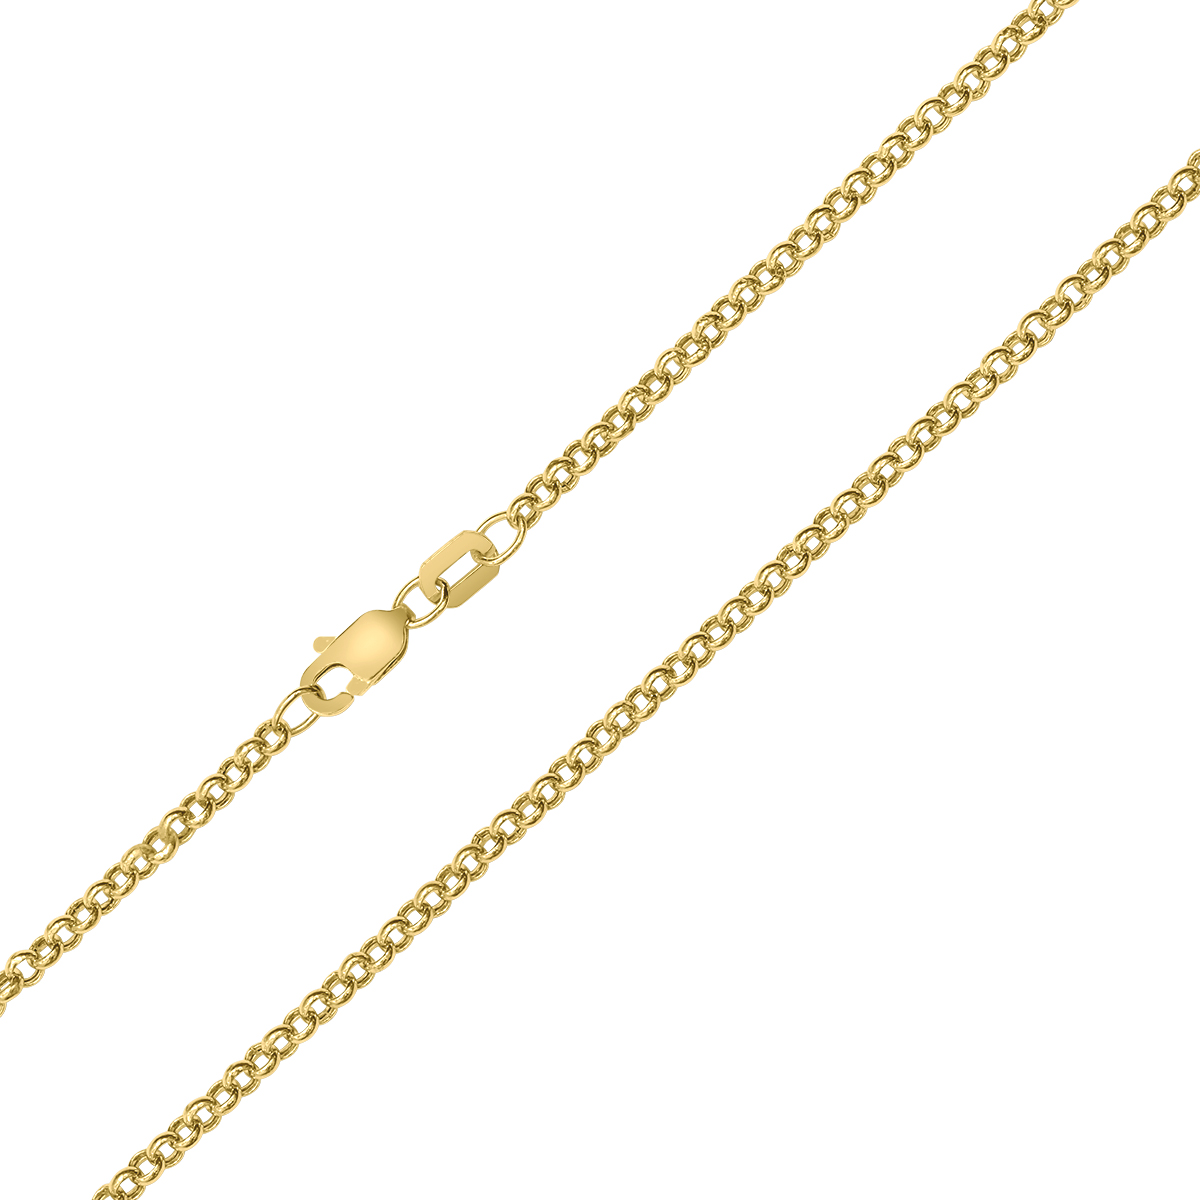 10K Yellow Gold 2.3MM Classic Rolo Chain with Lobster Clasp - 20 Inch